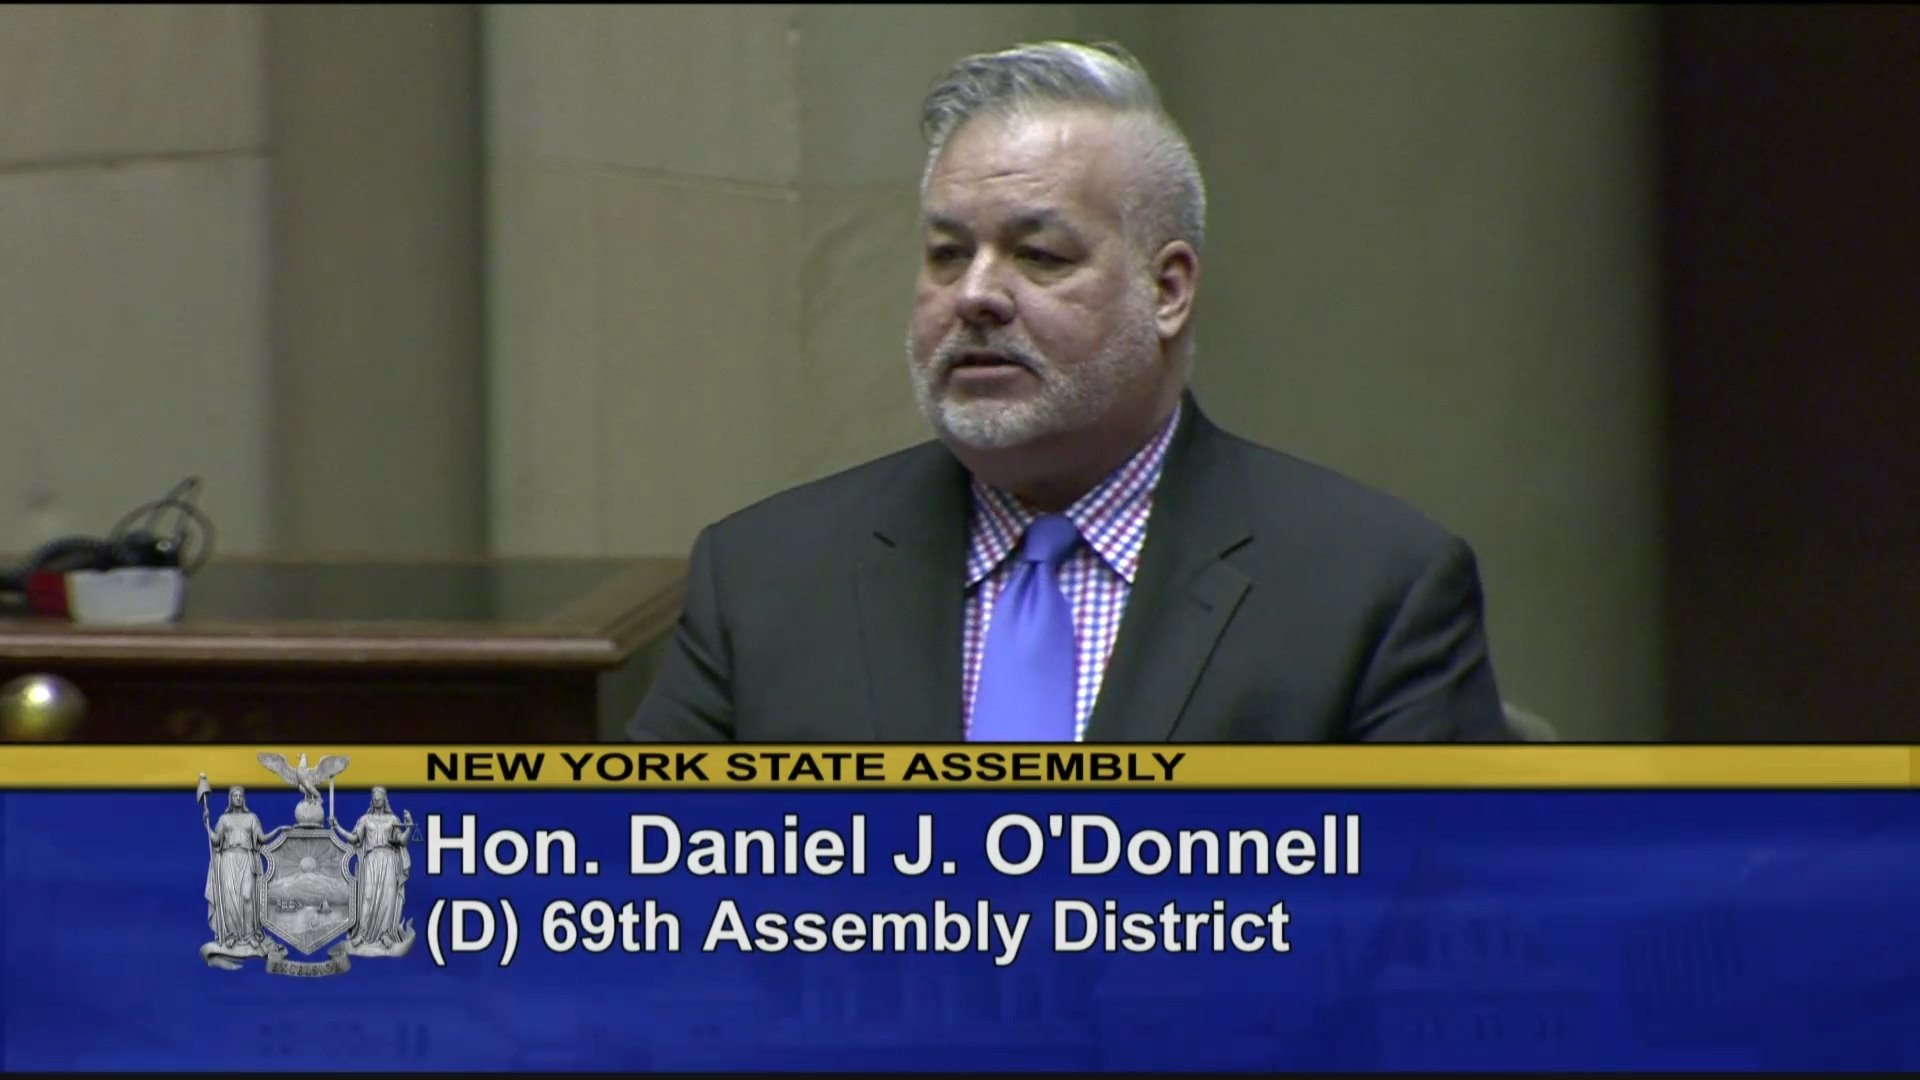 O'Donnell Debates Bill to Keep Guns Away From Domestic Violence Offenders in State Budget